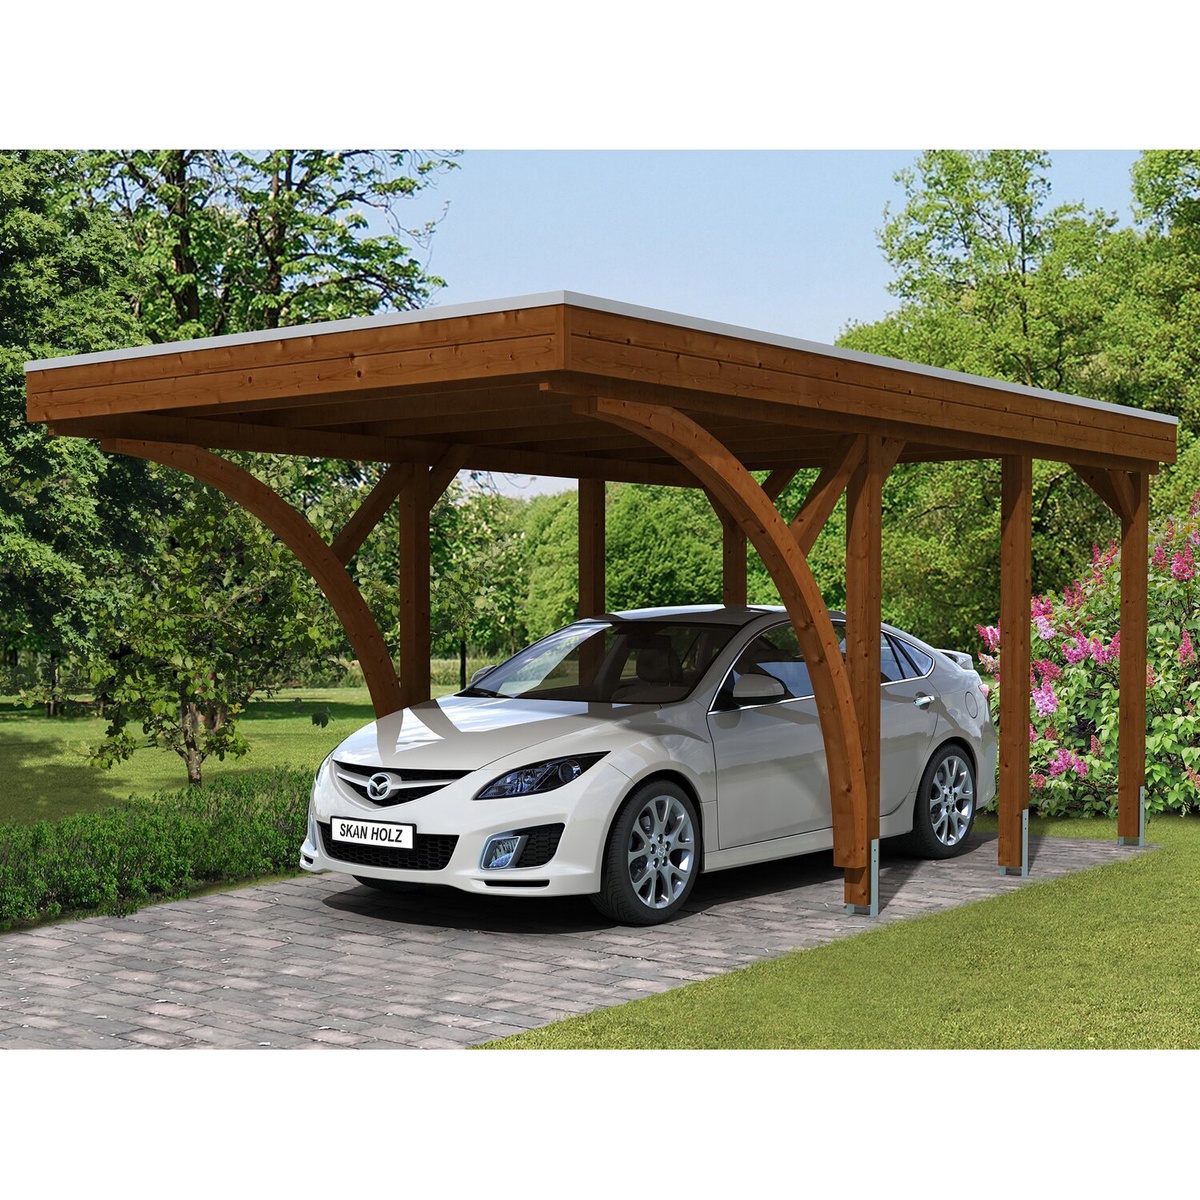 How to Build a DIY Carport: A Step-by-Step Guide